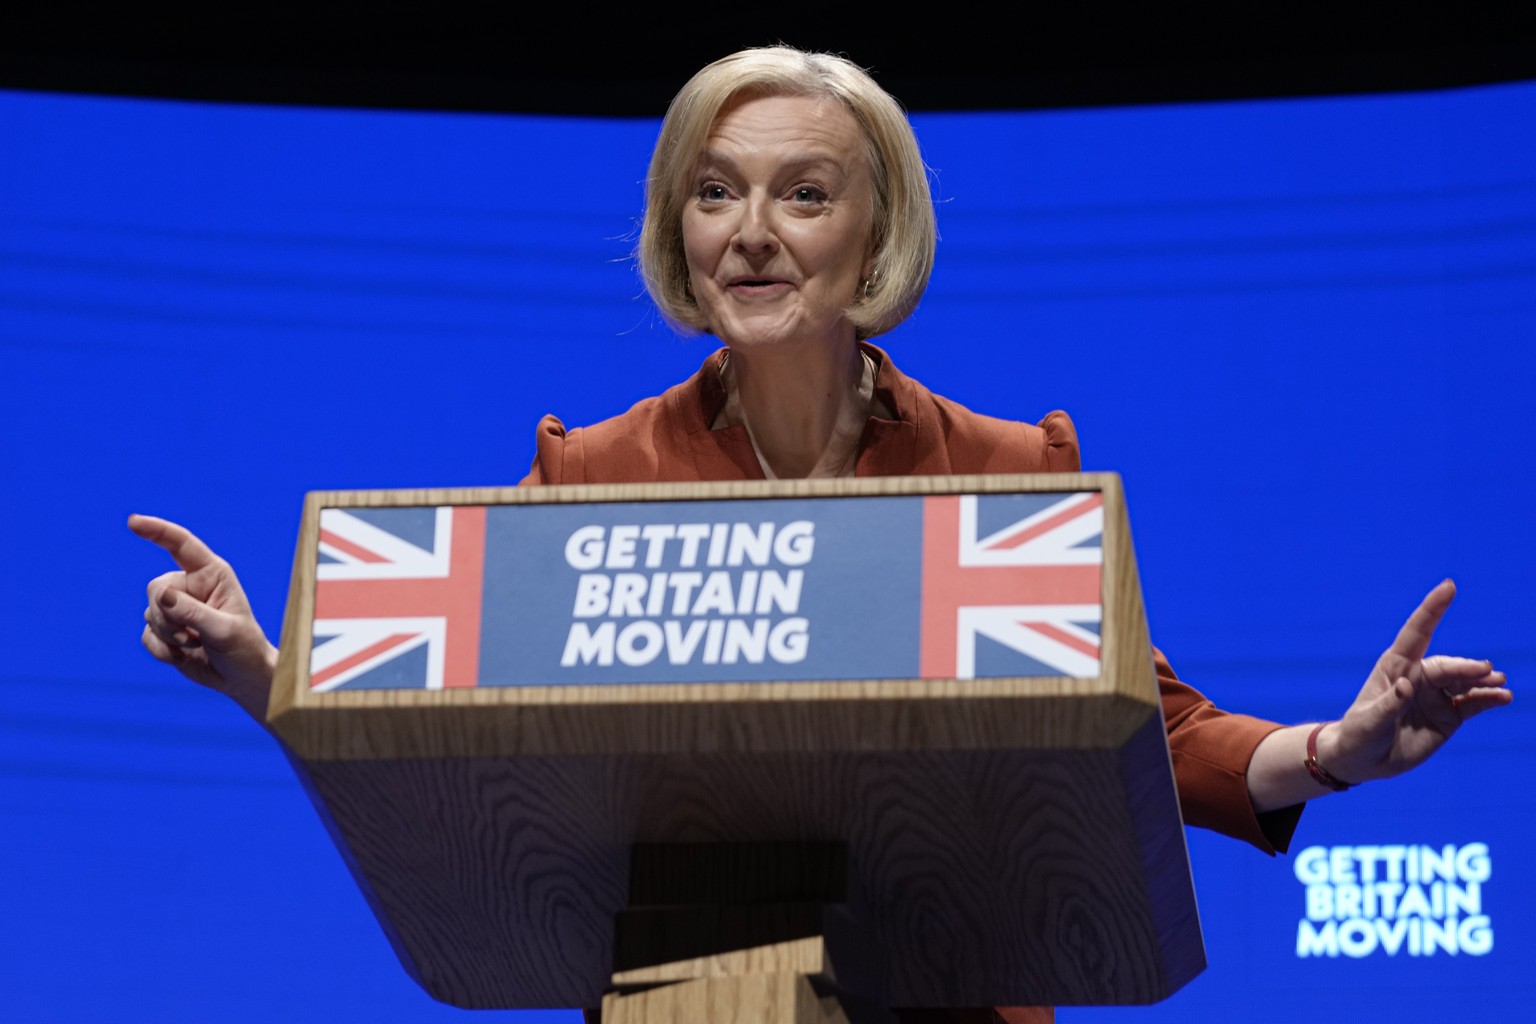 Britain's Prime Minister Liz Truss makes a speech at the Conservative Party conference at the ICC in Birmingham, England, Wednesday, Oct. 5, 2022. (AP Photo/Kirsty Wigglesworth)